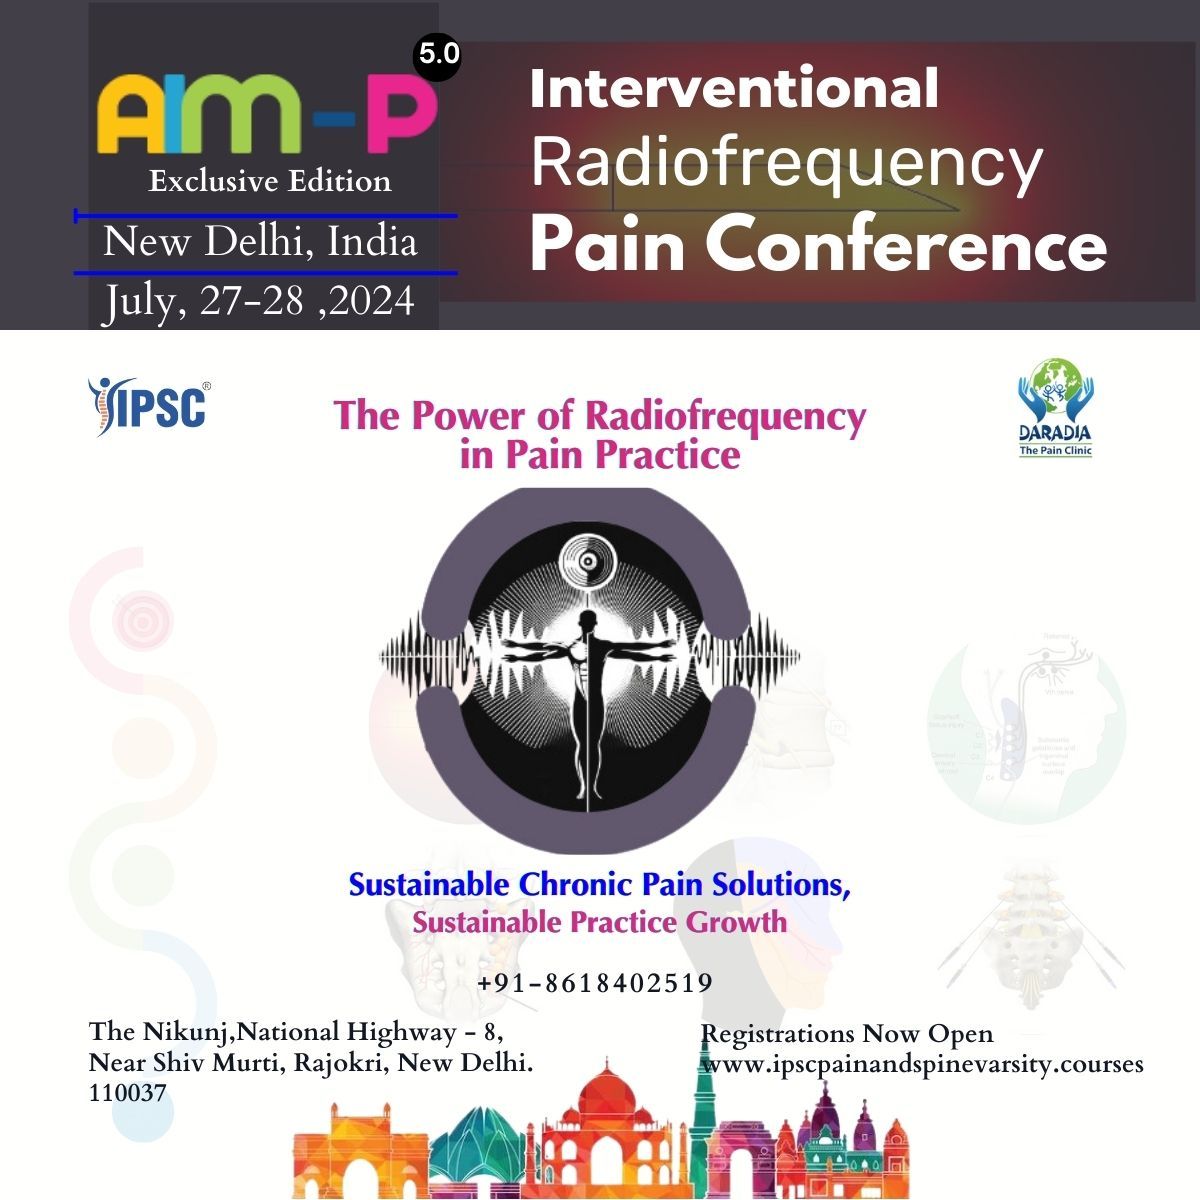 AIM-P 2024: Interventional Radiofrequency Pain Conference